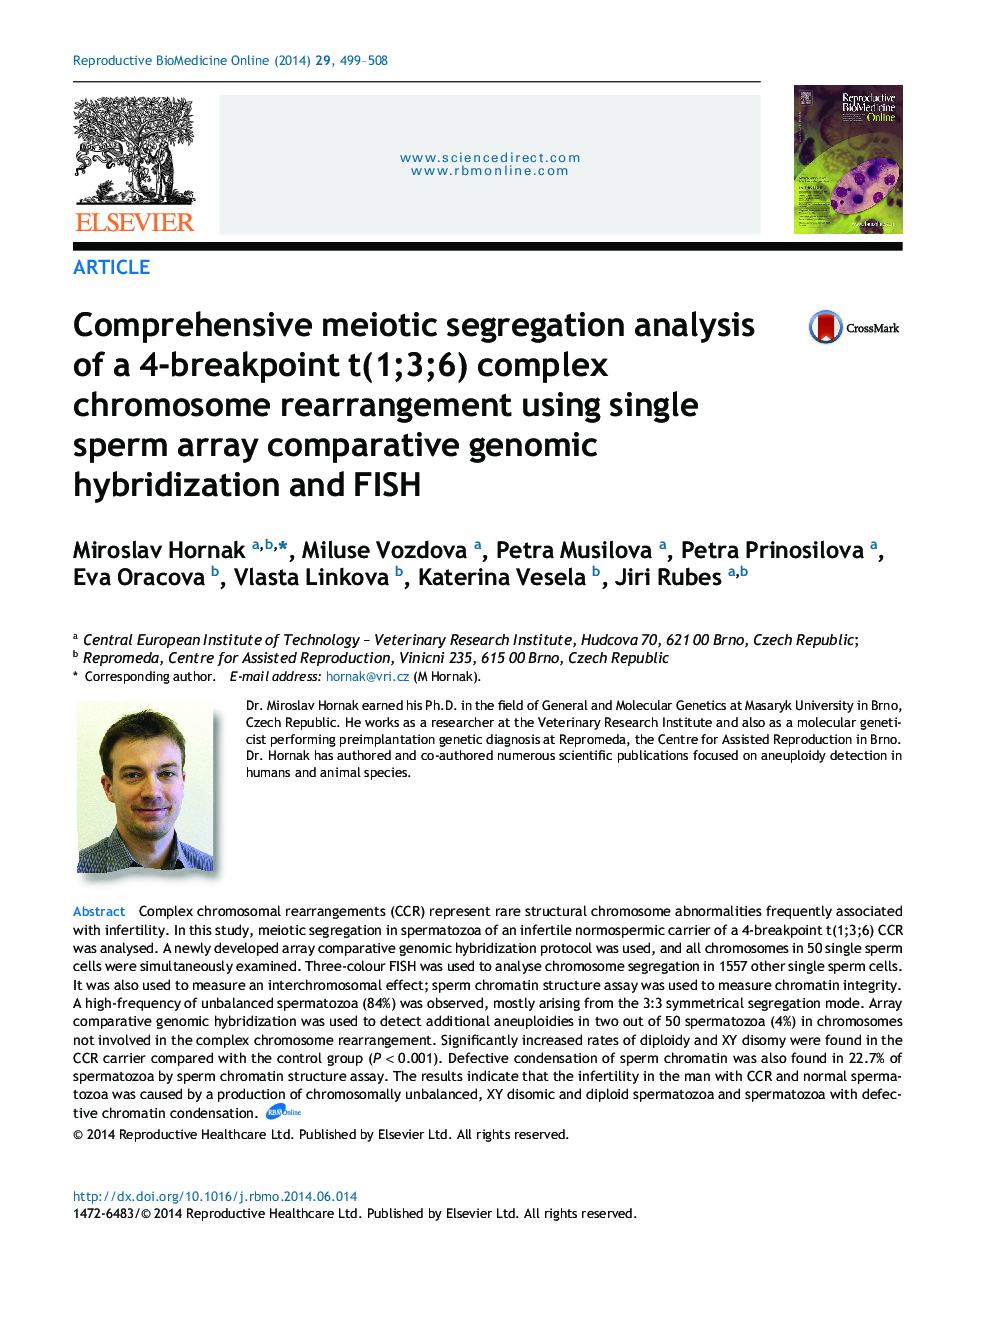 Comprehensive meiotic segregation analysis of a 4-breakpoint t(1;3;6) complex chromosome rearrangement using single sperm array comparative genomic hybridization and FISH